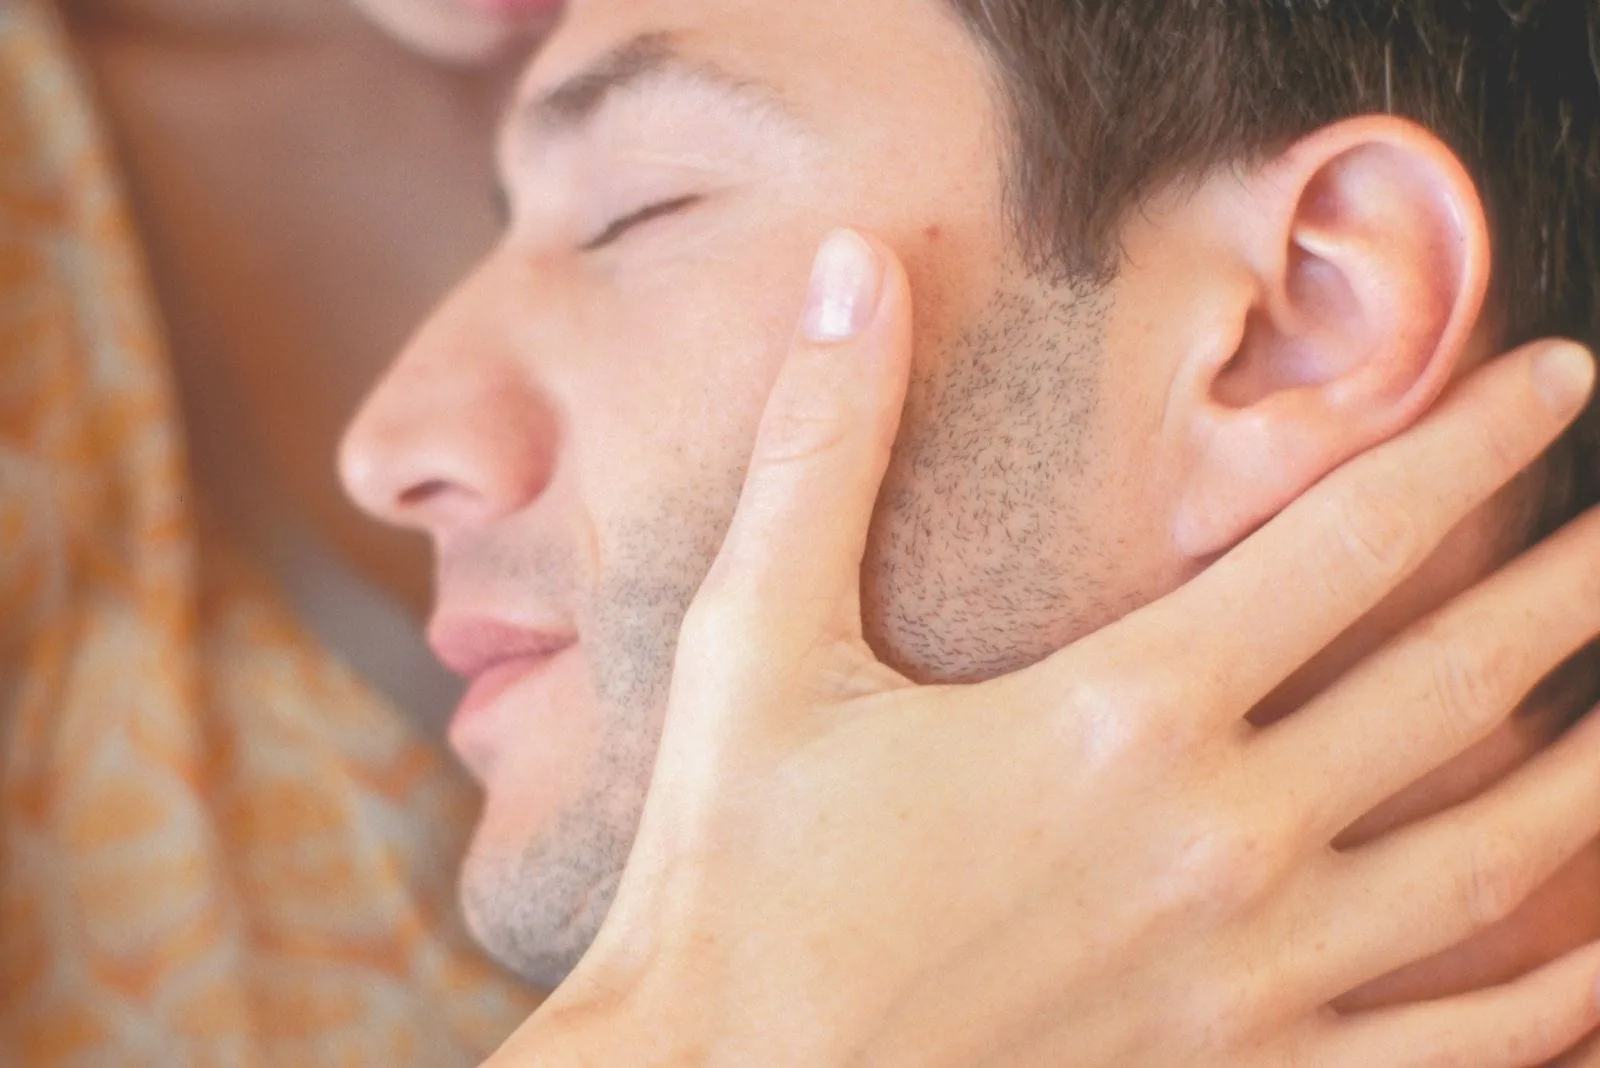 sweet couple snuggling with man's eyes closed 